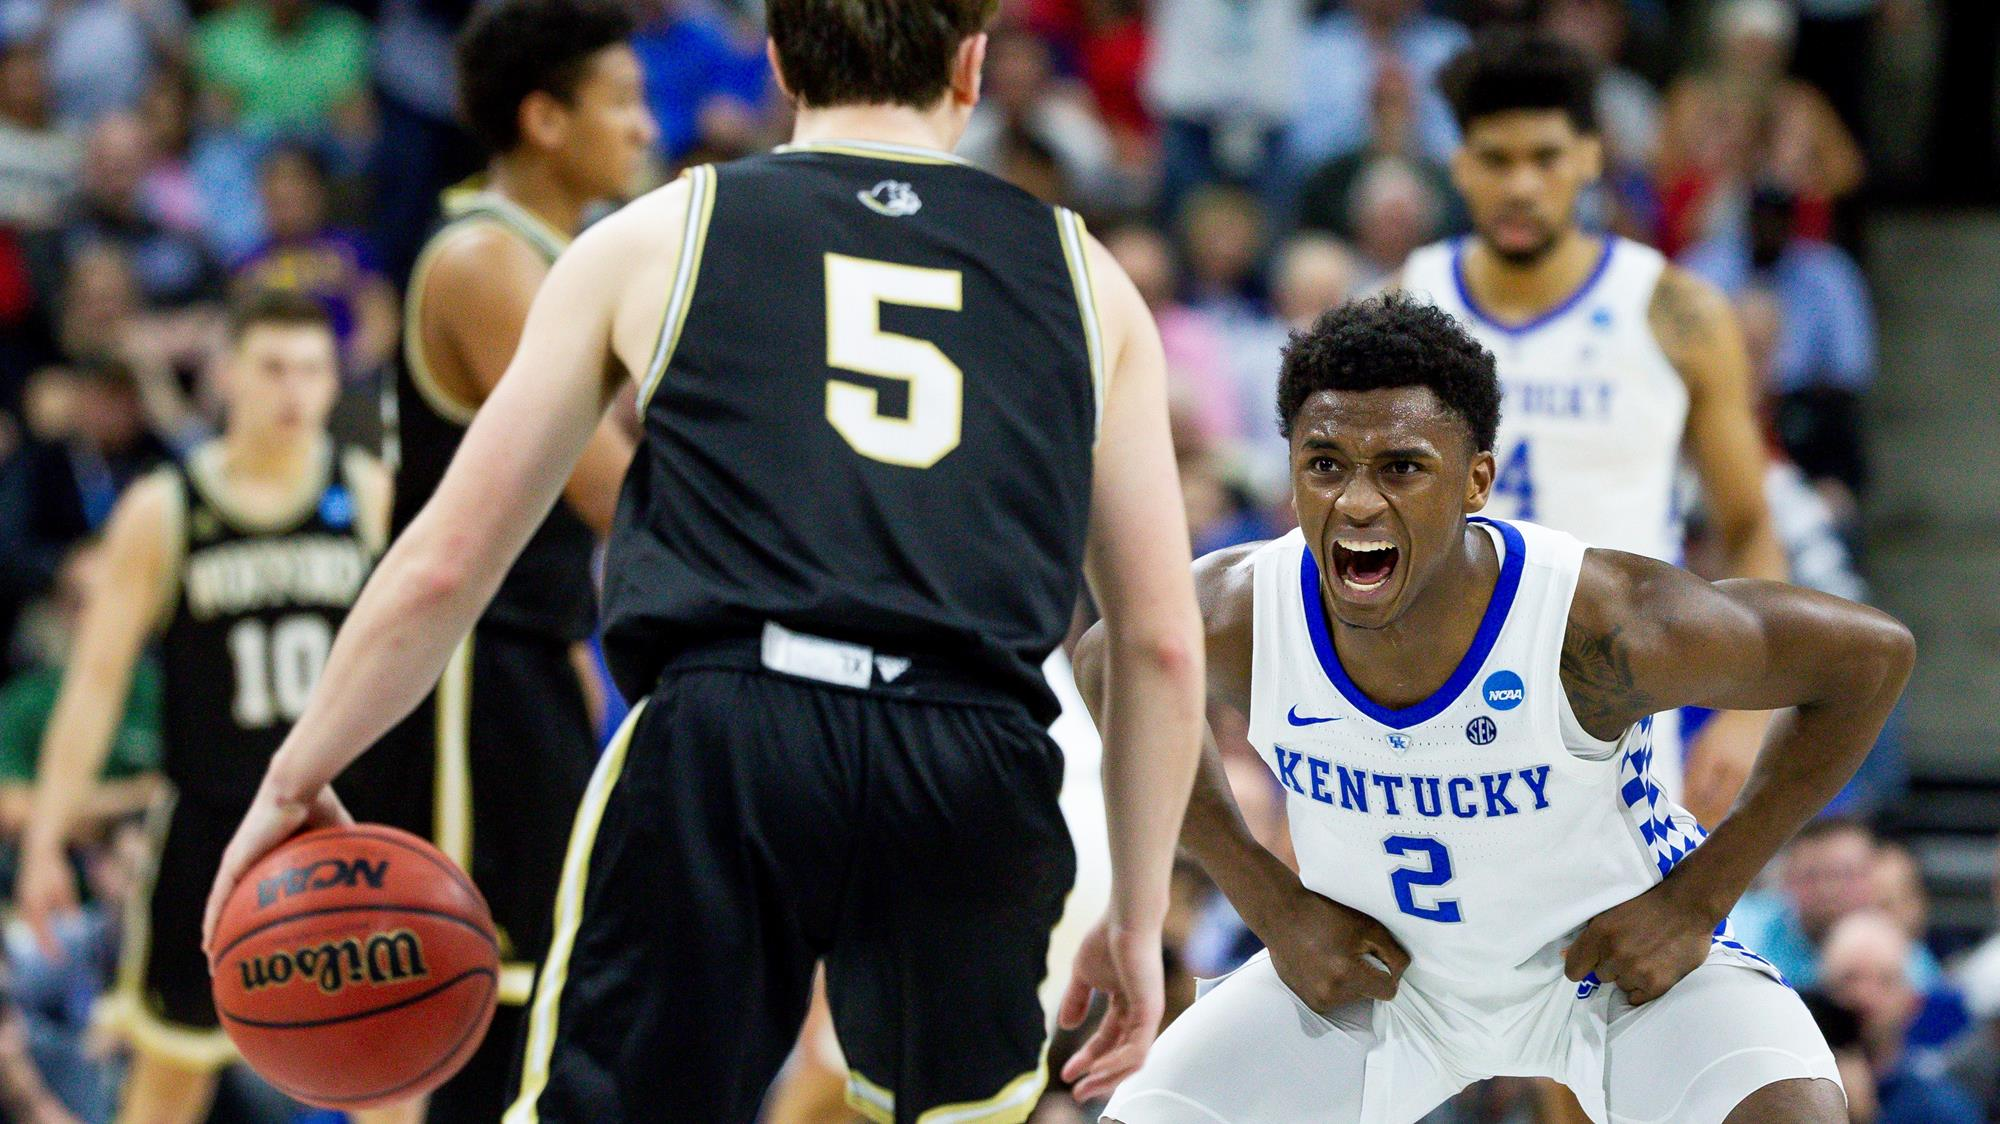 Kentucky Gets Past Wofford in NCAA Second Round